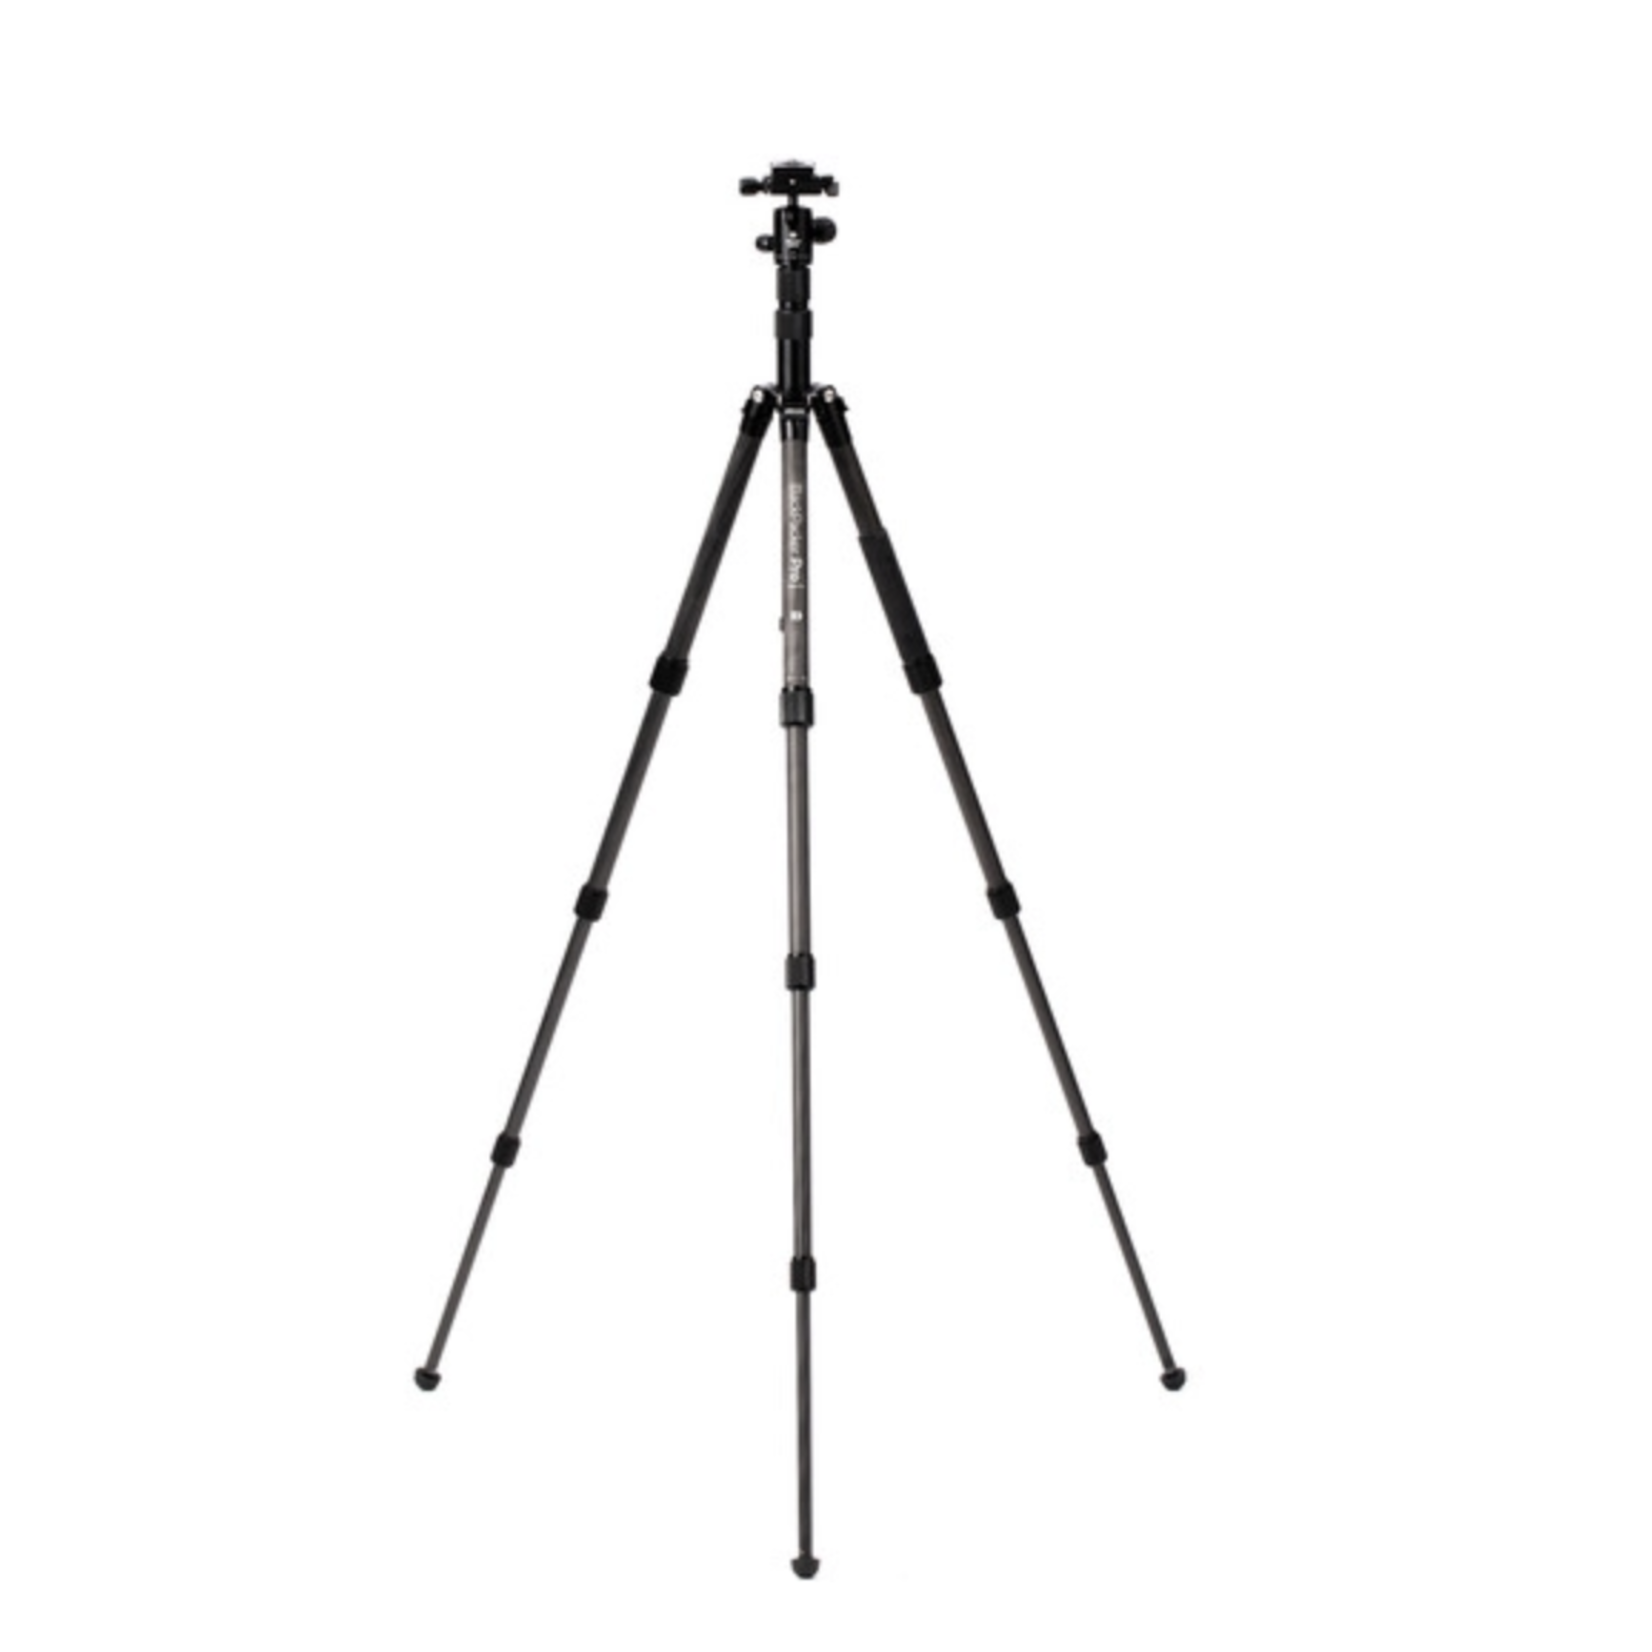 Benro Benro BackPacker Pro 6-in-1 Carbon Fiber Travel Tripod with Photo Ball Head (Black)